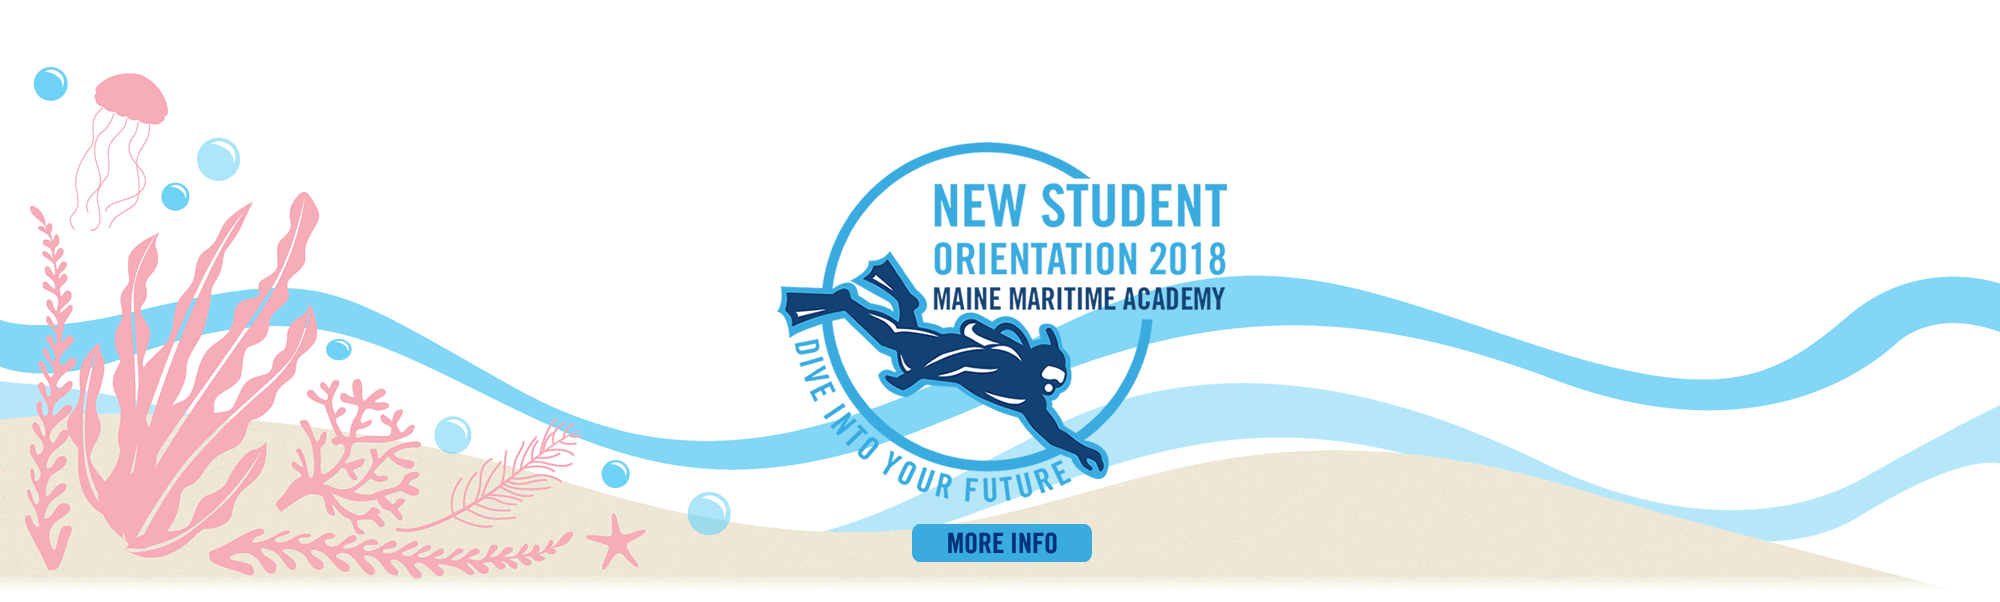 Maine Maritime Academy A COLLEGE OF ENGINEERING, MANAGEMENT, SCIENCE